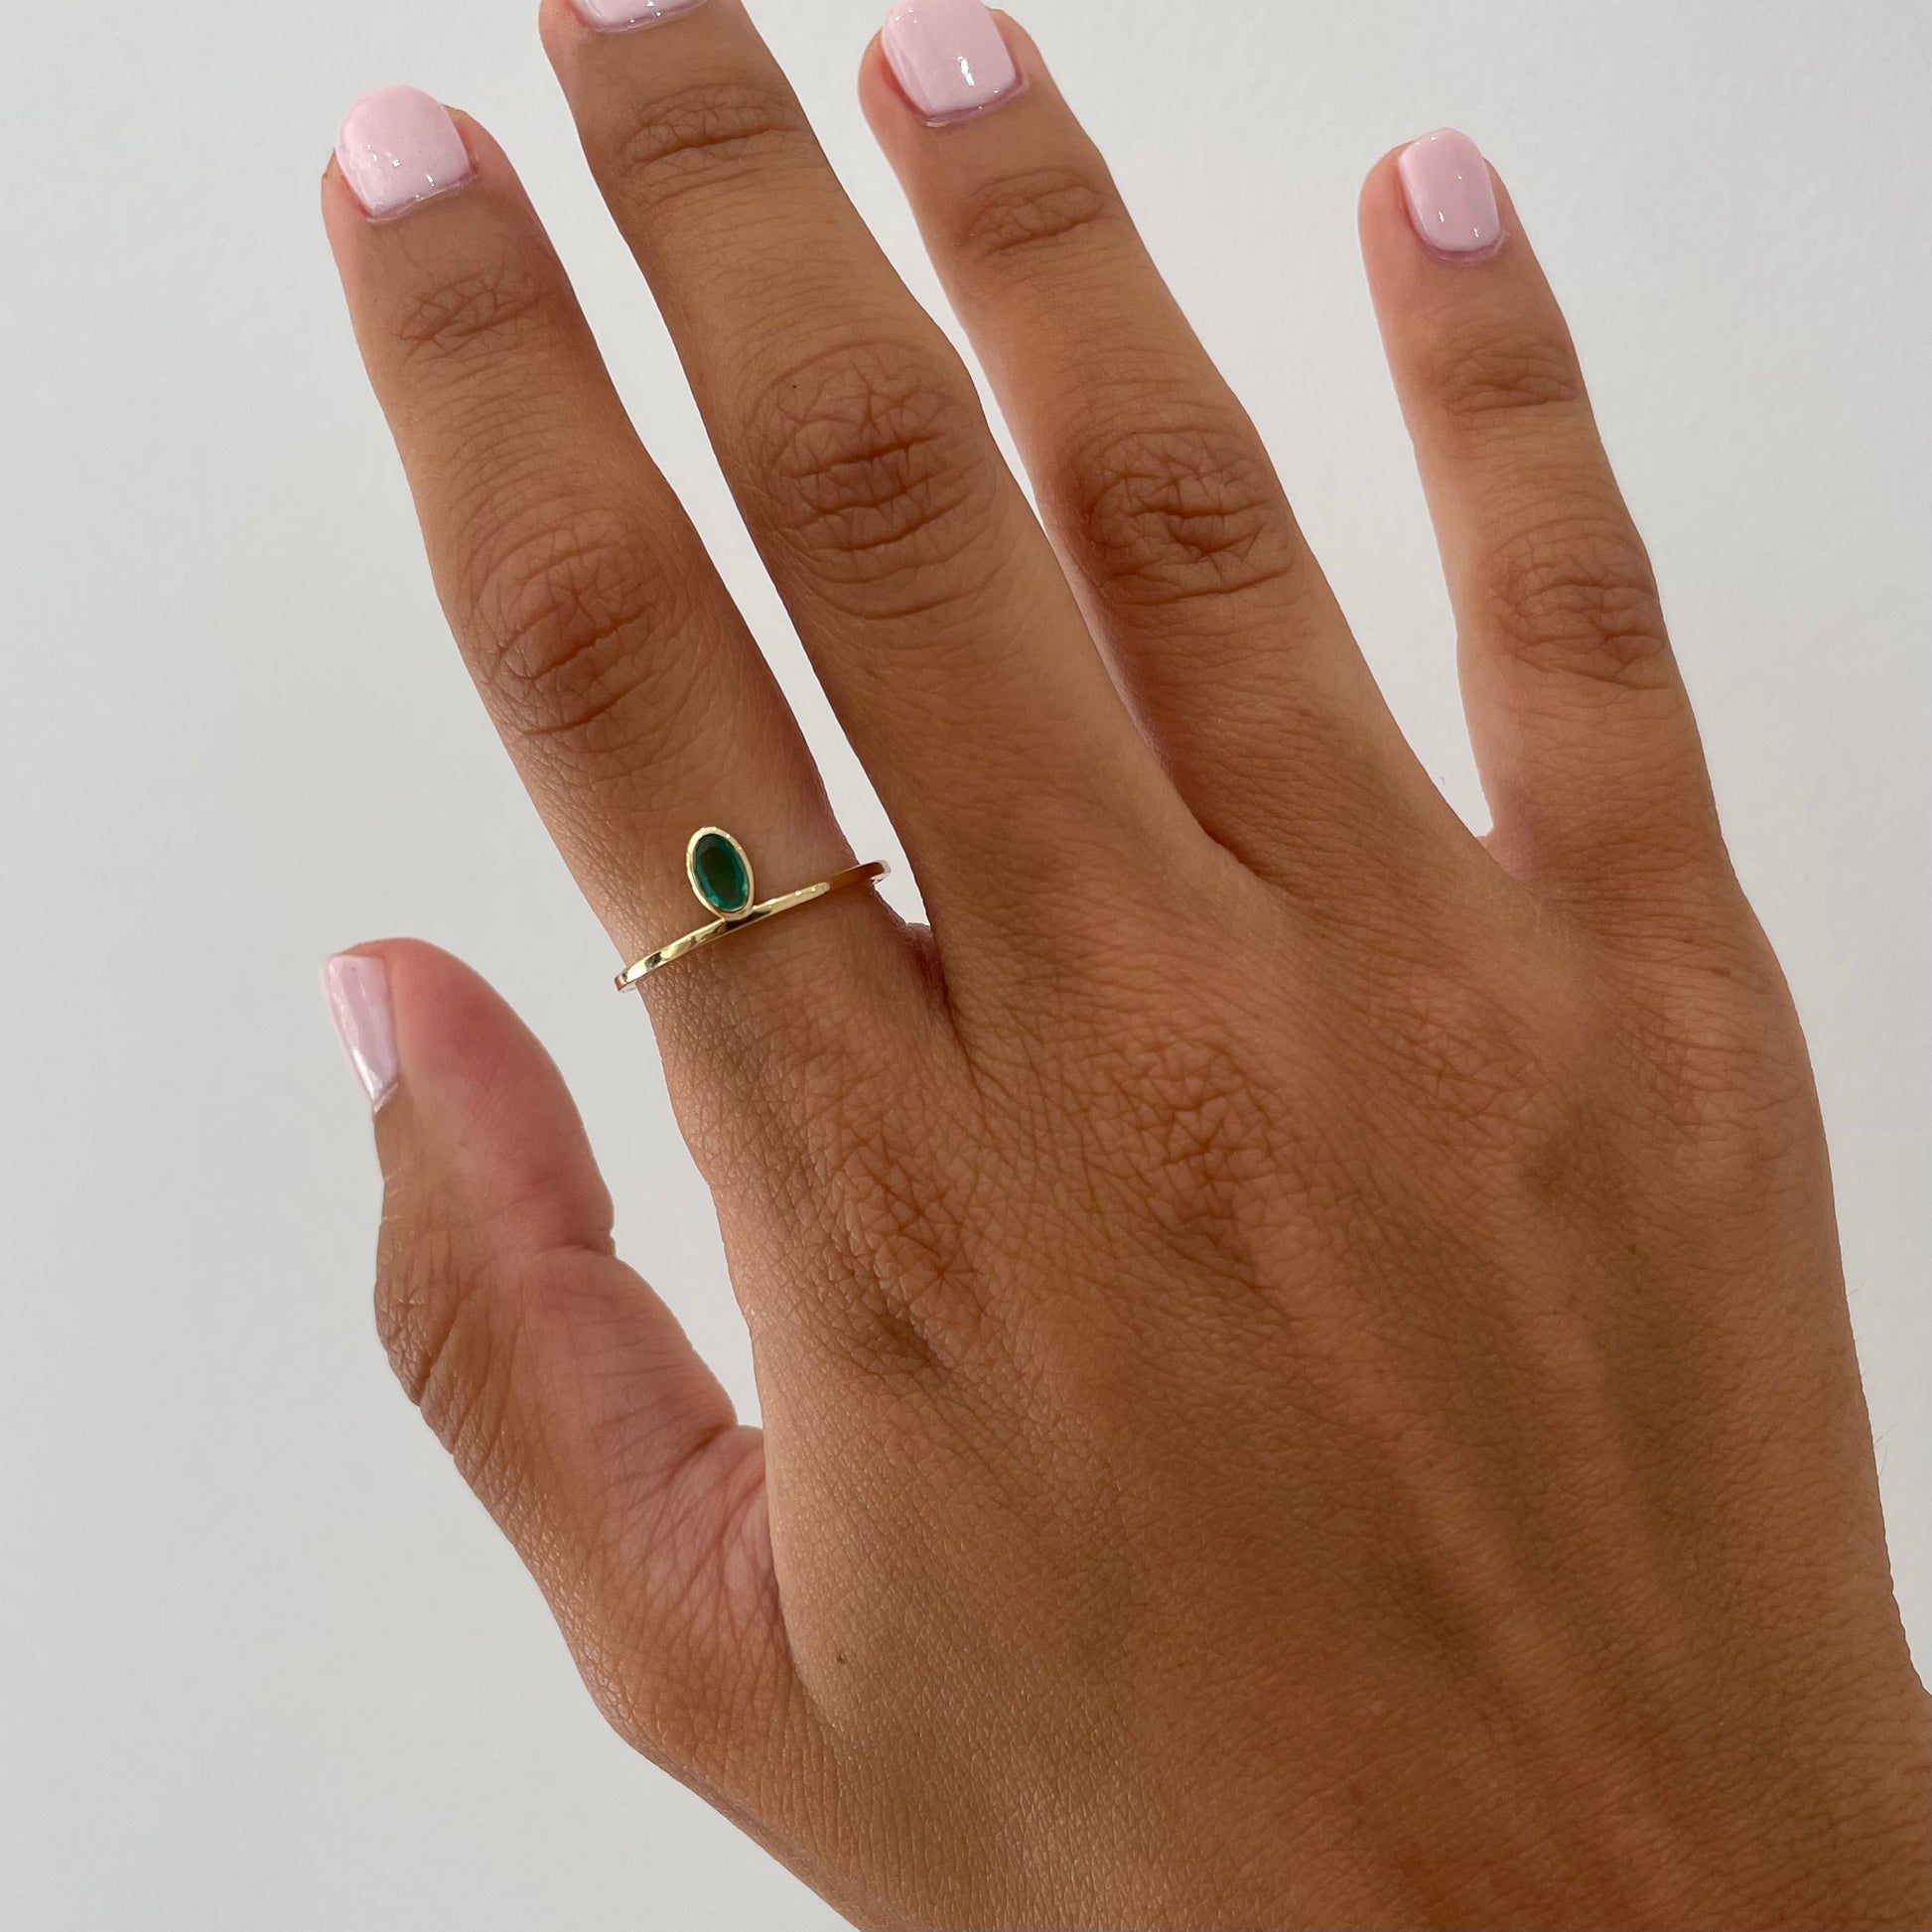 "Lou" Oval Emerald Ring - Green - - Jewelry - Goldie Paris Jewelry - Ring stackable statement